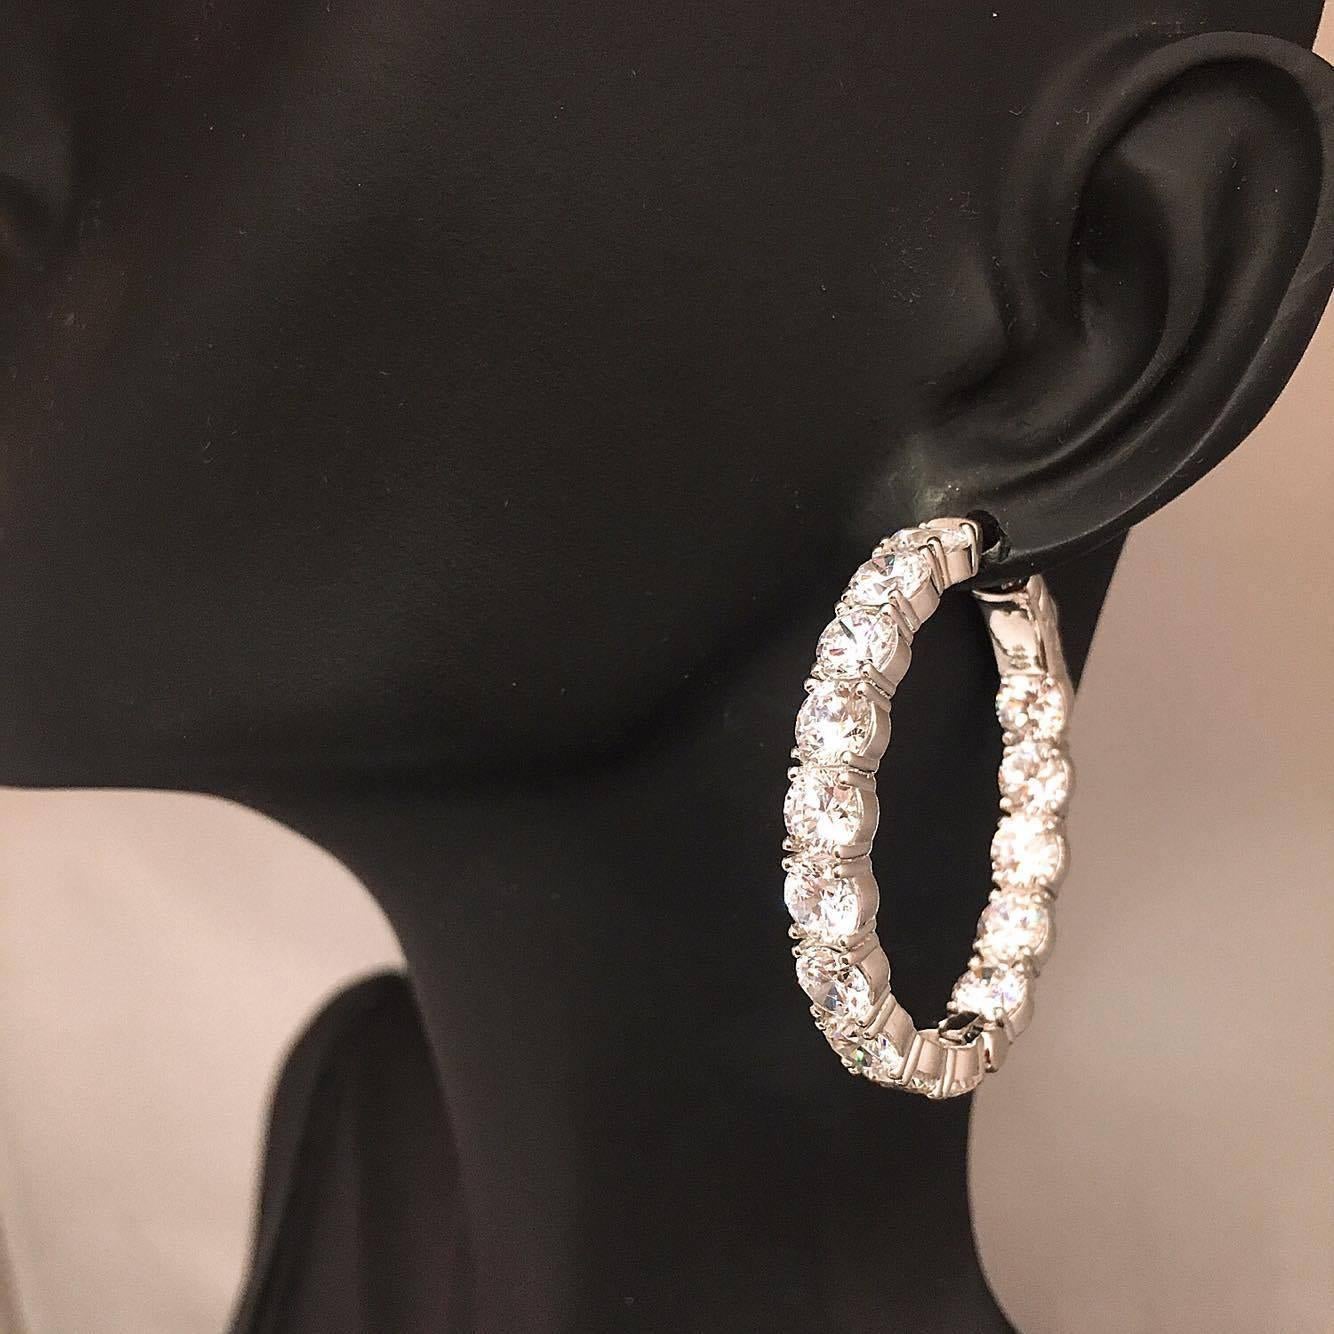 Our one of a kind push locking mechanism ensures this hoop never falls off your ear! The measurement of these hoops is approximately 1.25 inch top to bottom measurement.
Approx Total weight: 11.20 Carats 
Color: F 
Clarity: Vs 
Cut: Excellent 

If